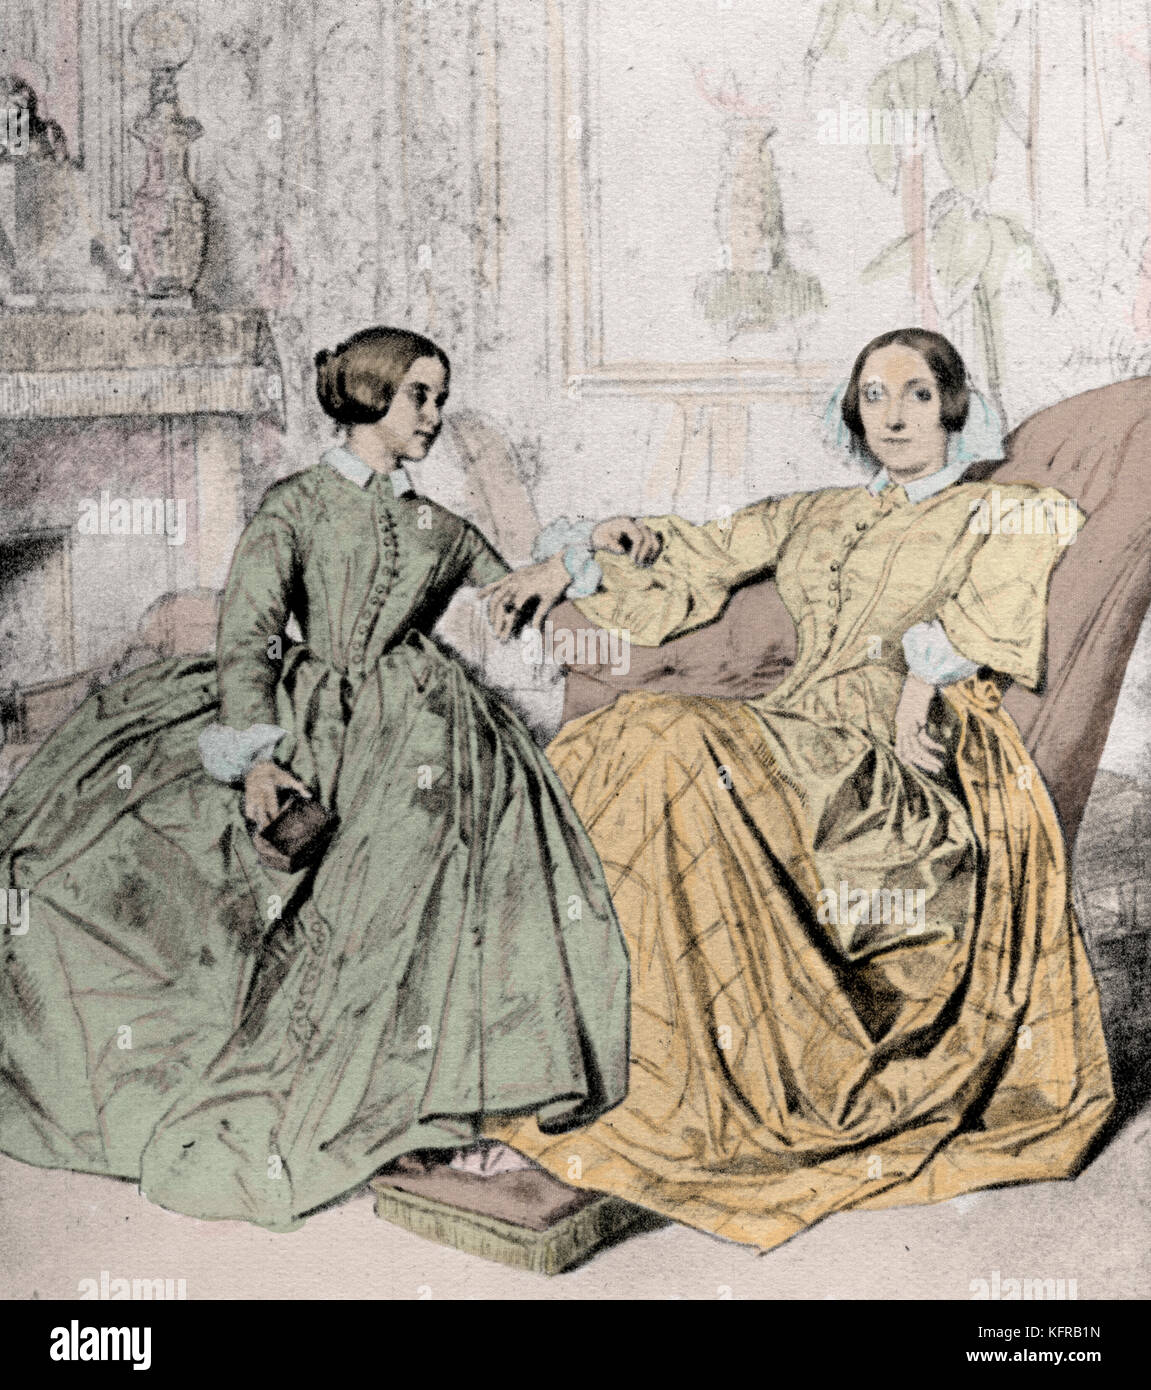 Countess Marie d'Agoult, with her daughter Claire Christine d'Agoult (the future Marquise of Charnacé). Romantically linked to Franz Liszt, Hungarian pianist and composer,  22 October 1811 - 31 July 1886. Stock Photo